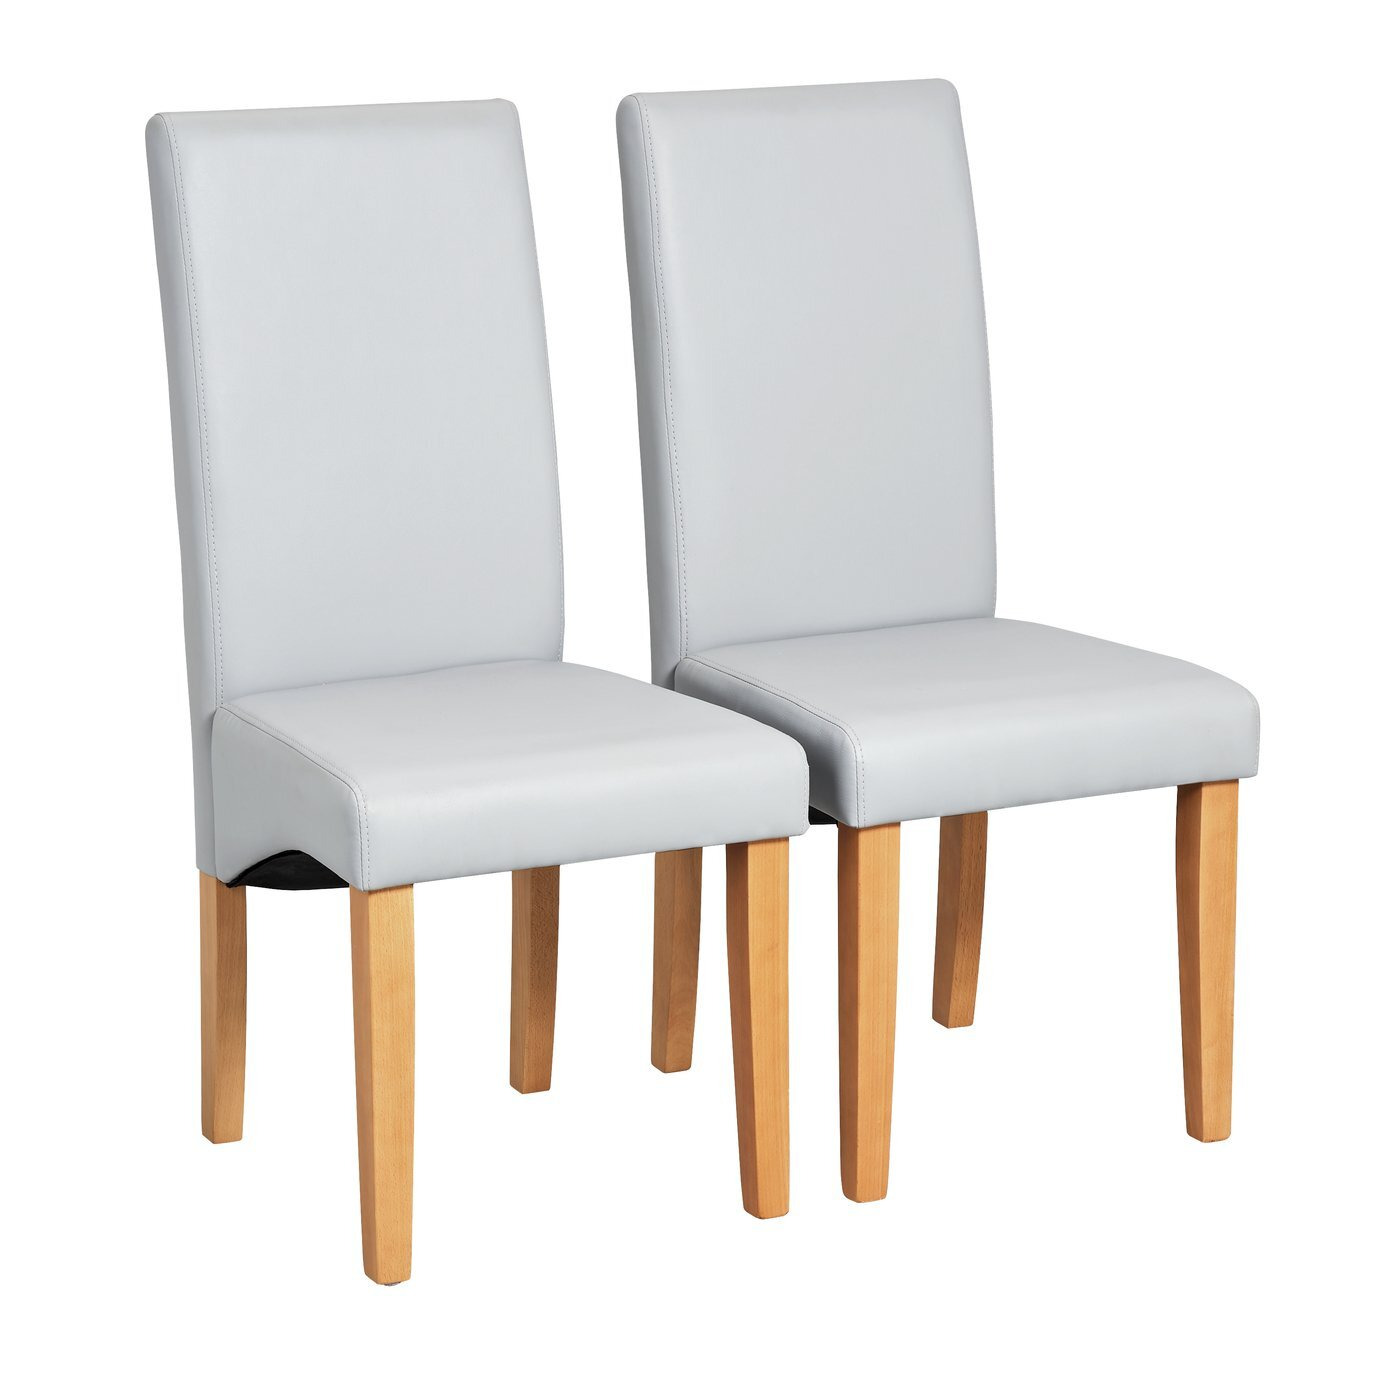 Argos Home Pair of Skirted Dining Chairs - Grey - image 1